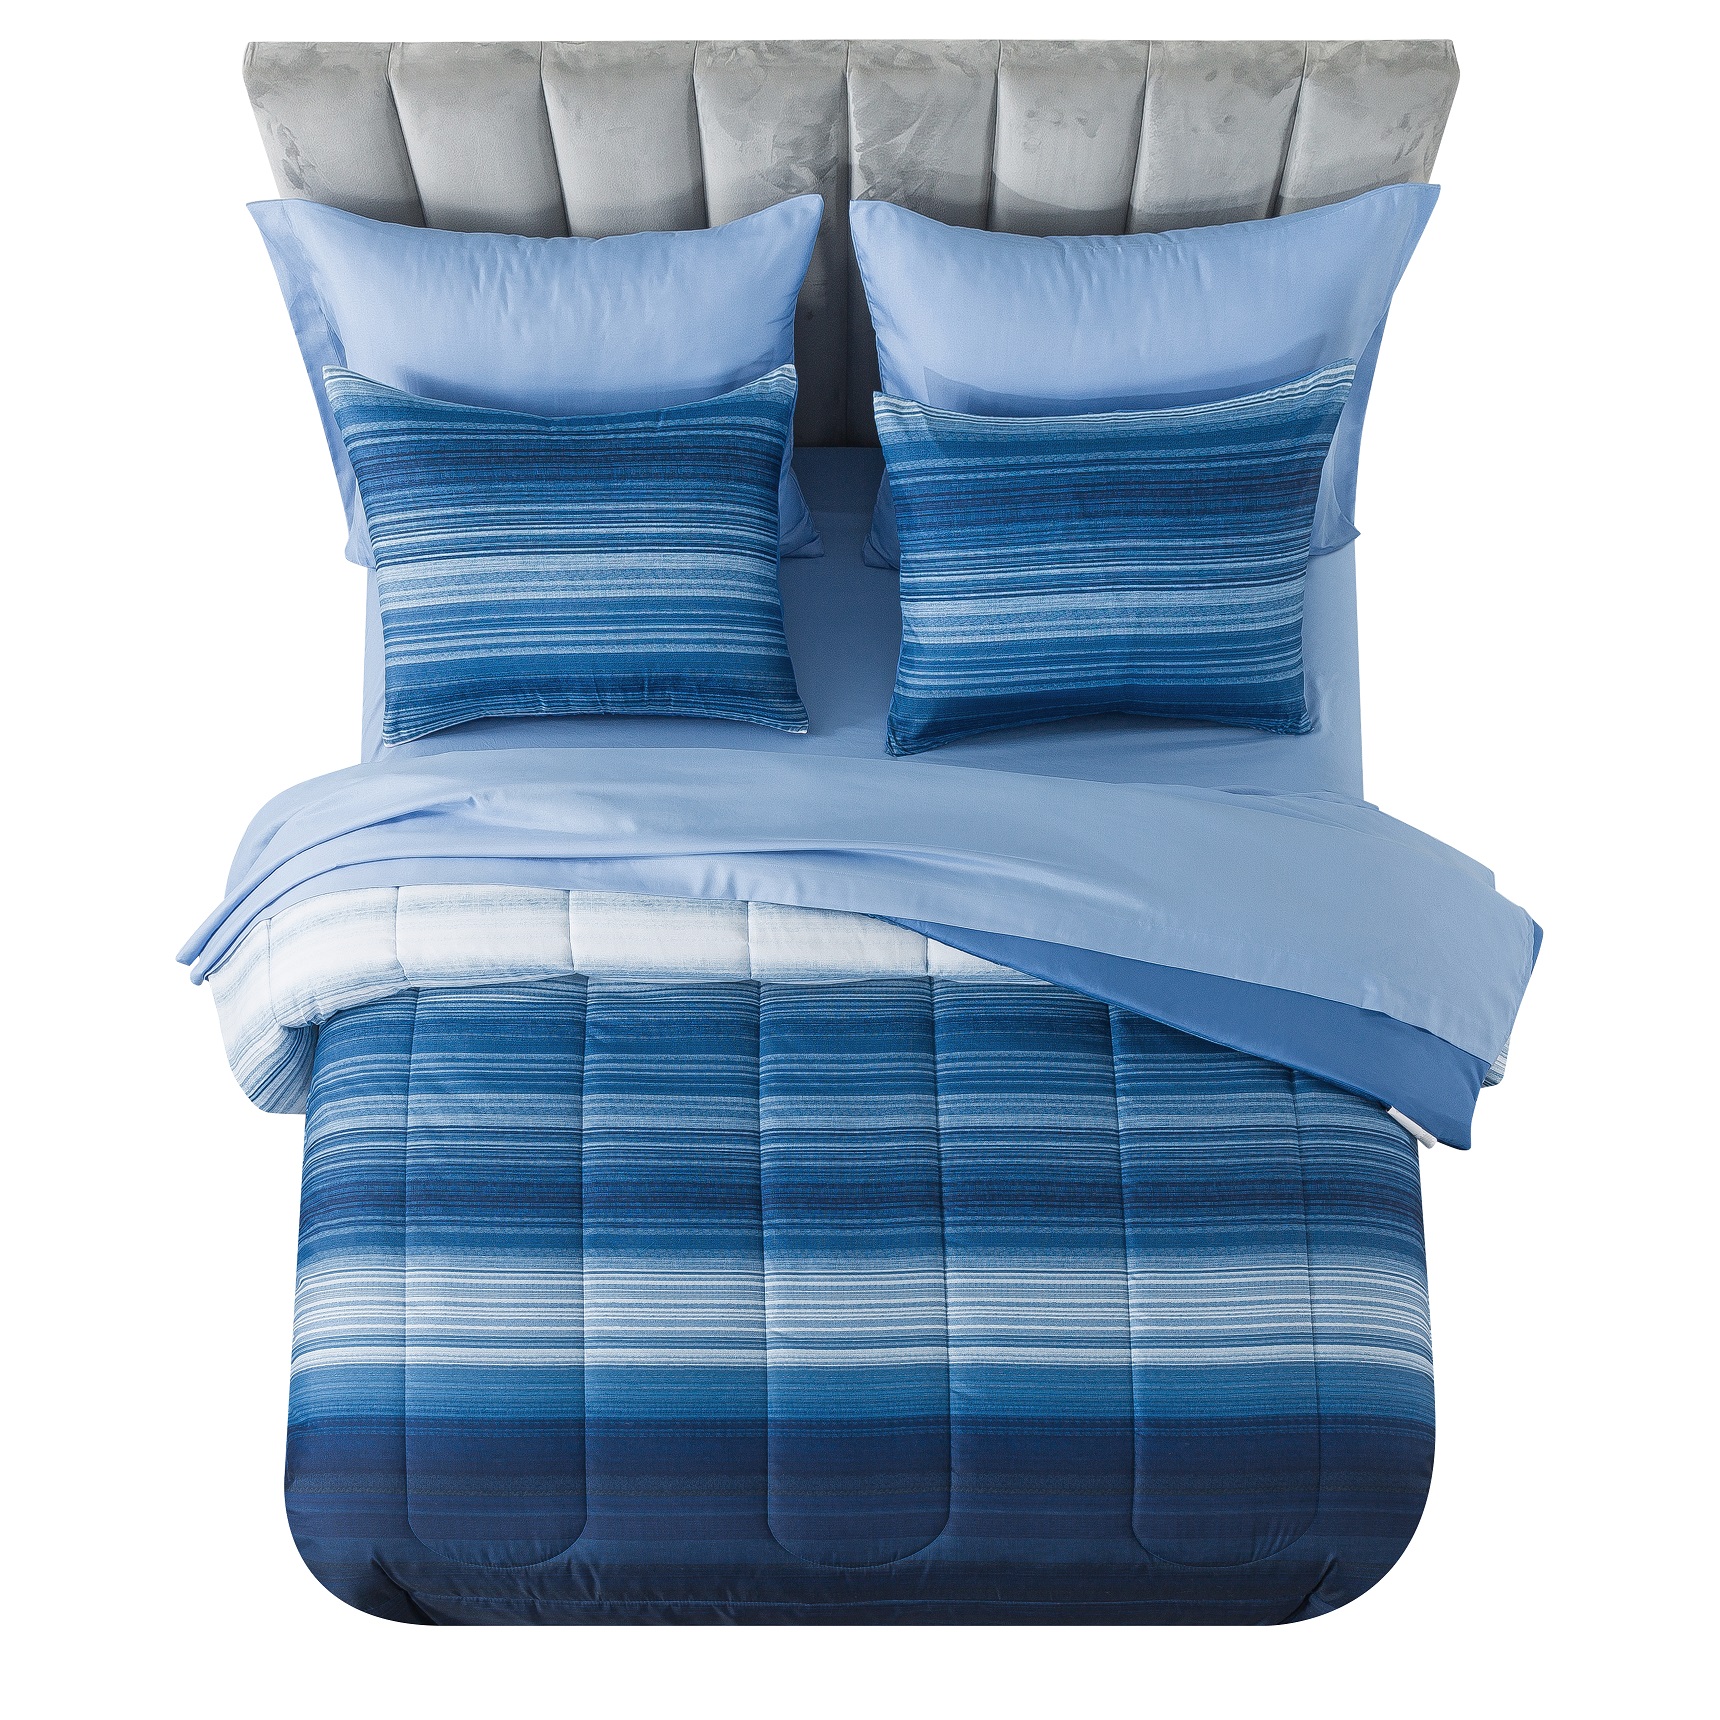 Mainstays Blue Stripe 6 Piece Bed in a Bag Comforter Set With Sheets, Twin/Twin XL - image 4 of 8